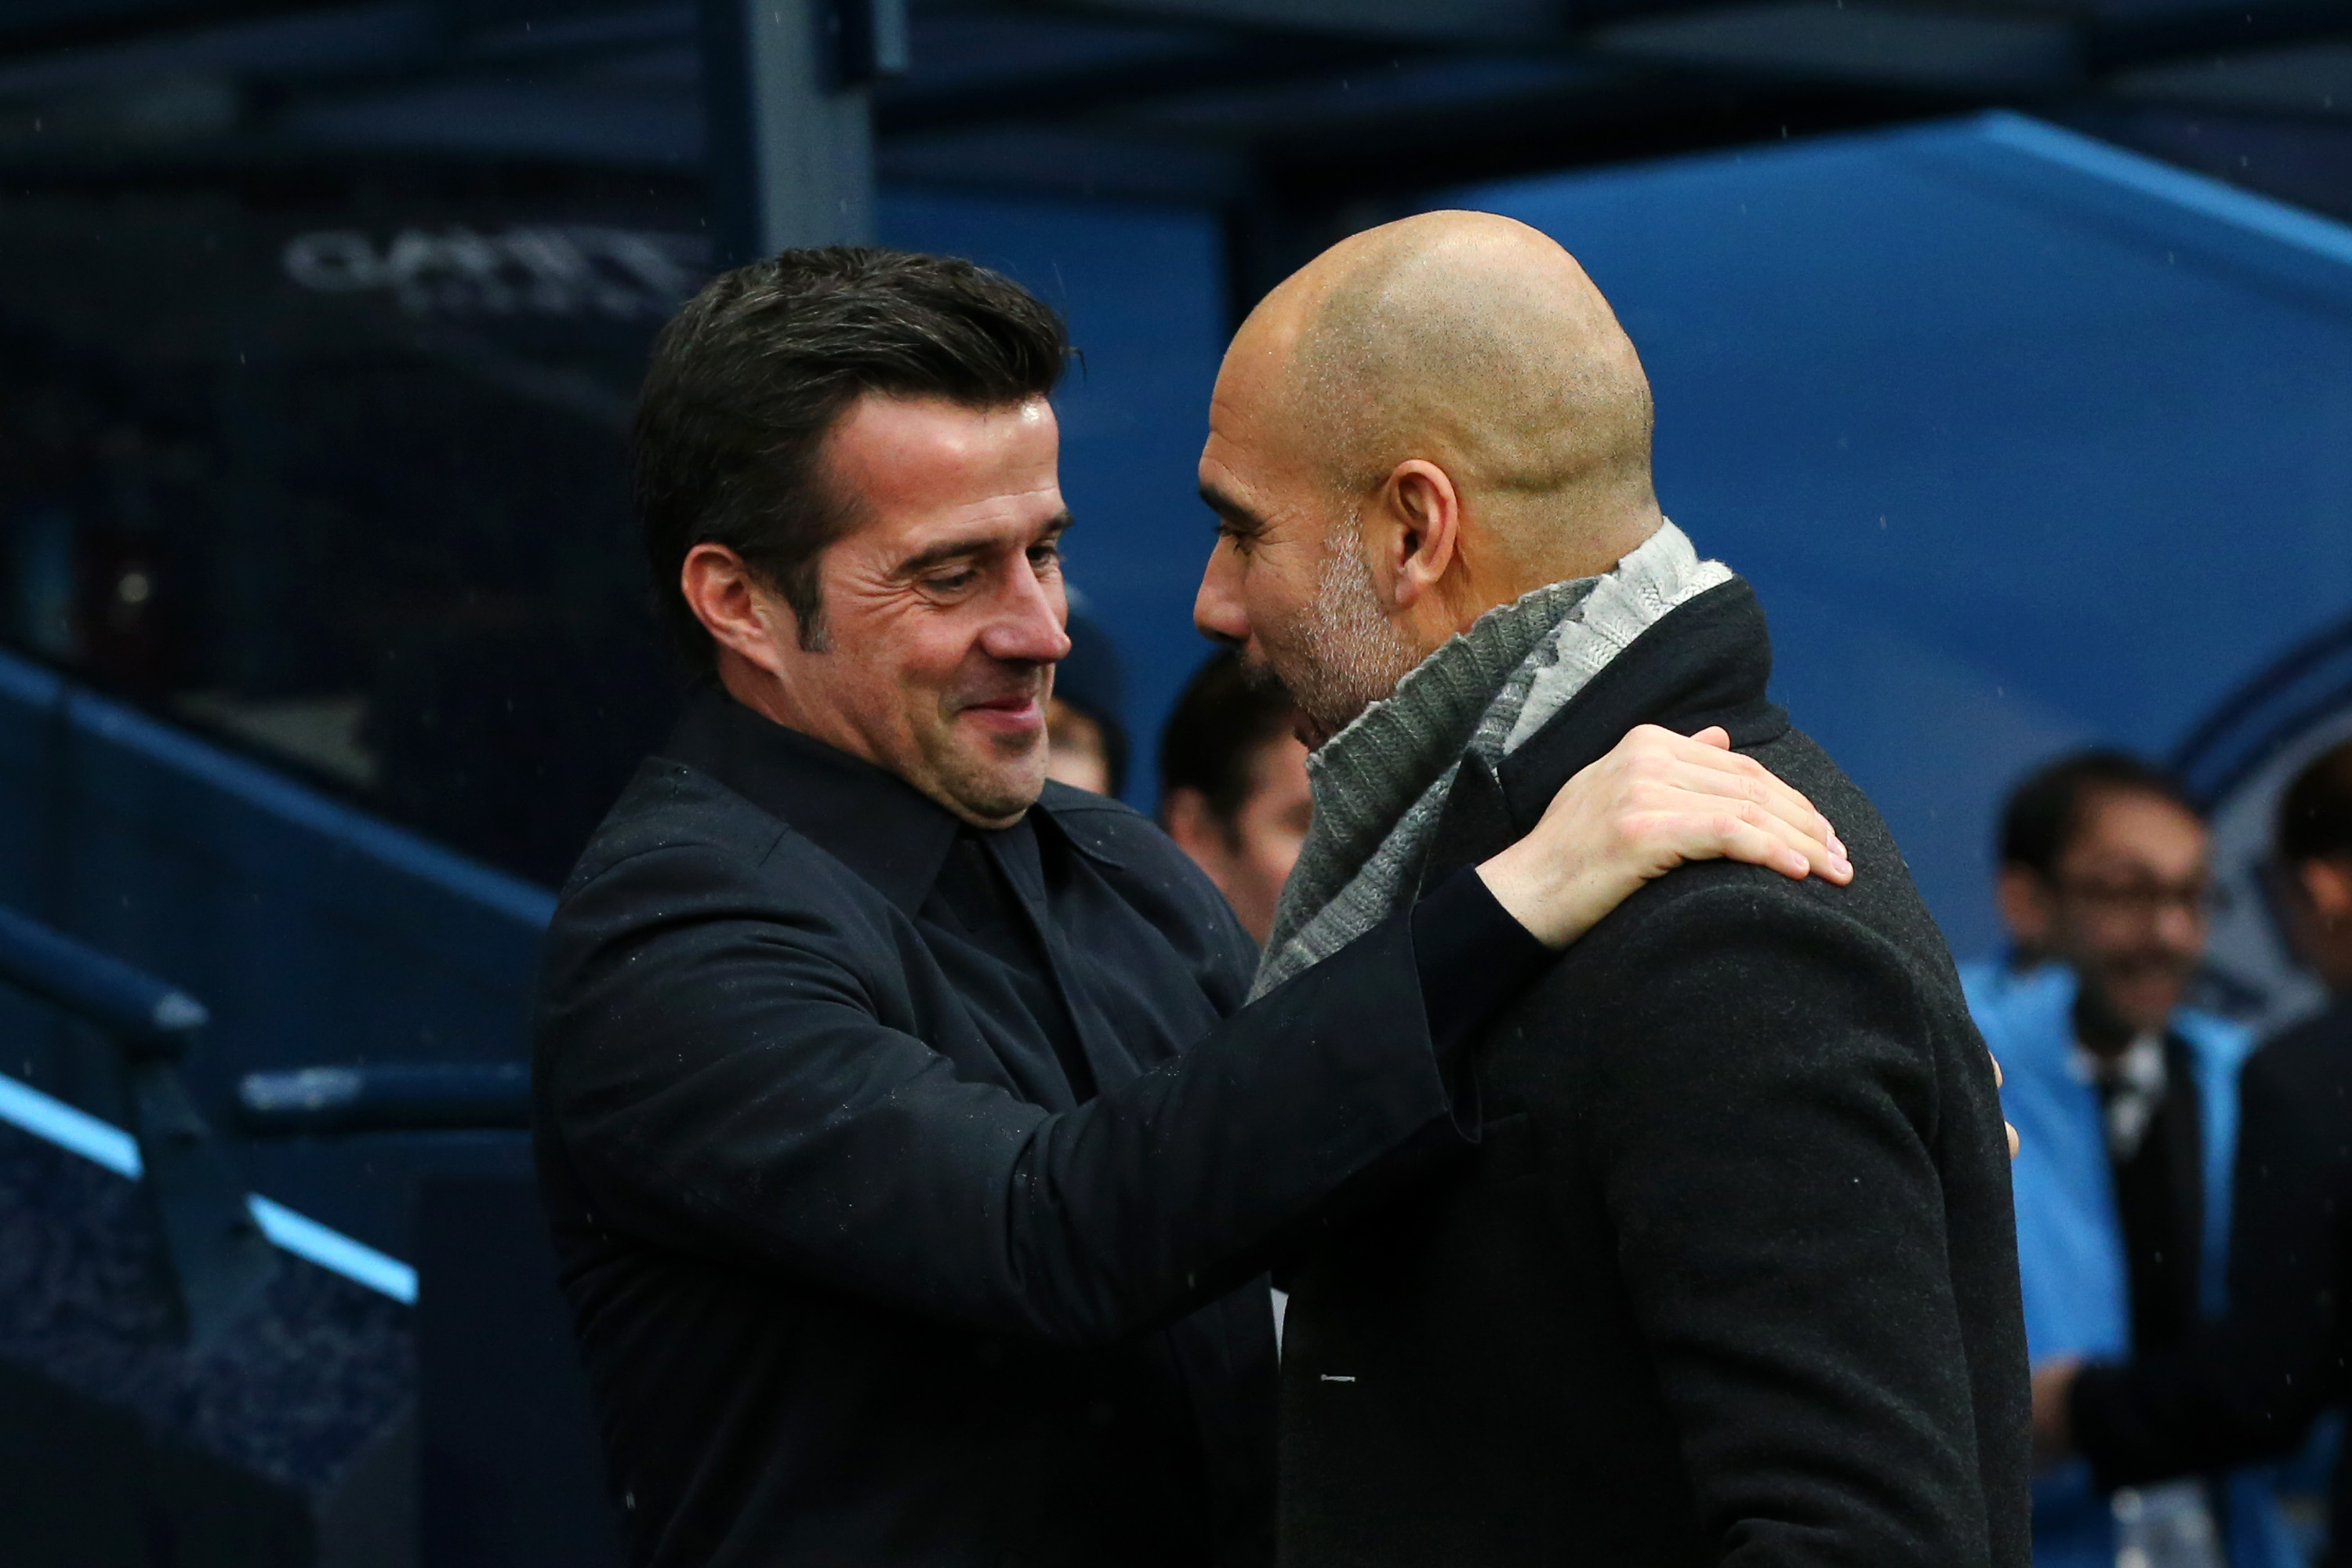 MANCHESTER, ENGLAND - DECEMBER 15:  Josep Guardiola, Manager of Manchester City greets Marco Silva, Manager of Everton prior to the Premier League match between Manchester City and Everton FC at Etihad Stadium on December 15, 2018 in Manchester, United Kingdom.  (Photo by Alex Livesey/Getty Images)